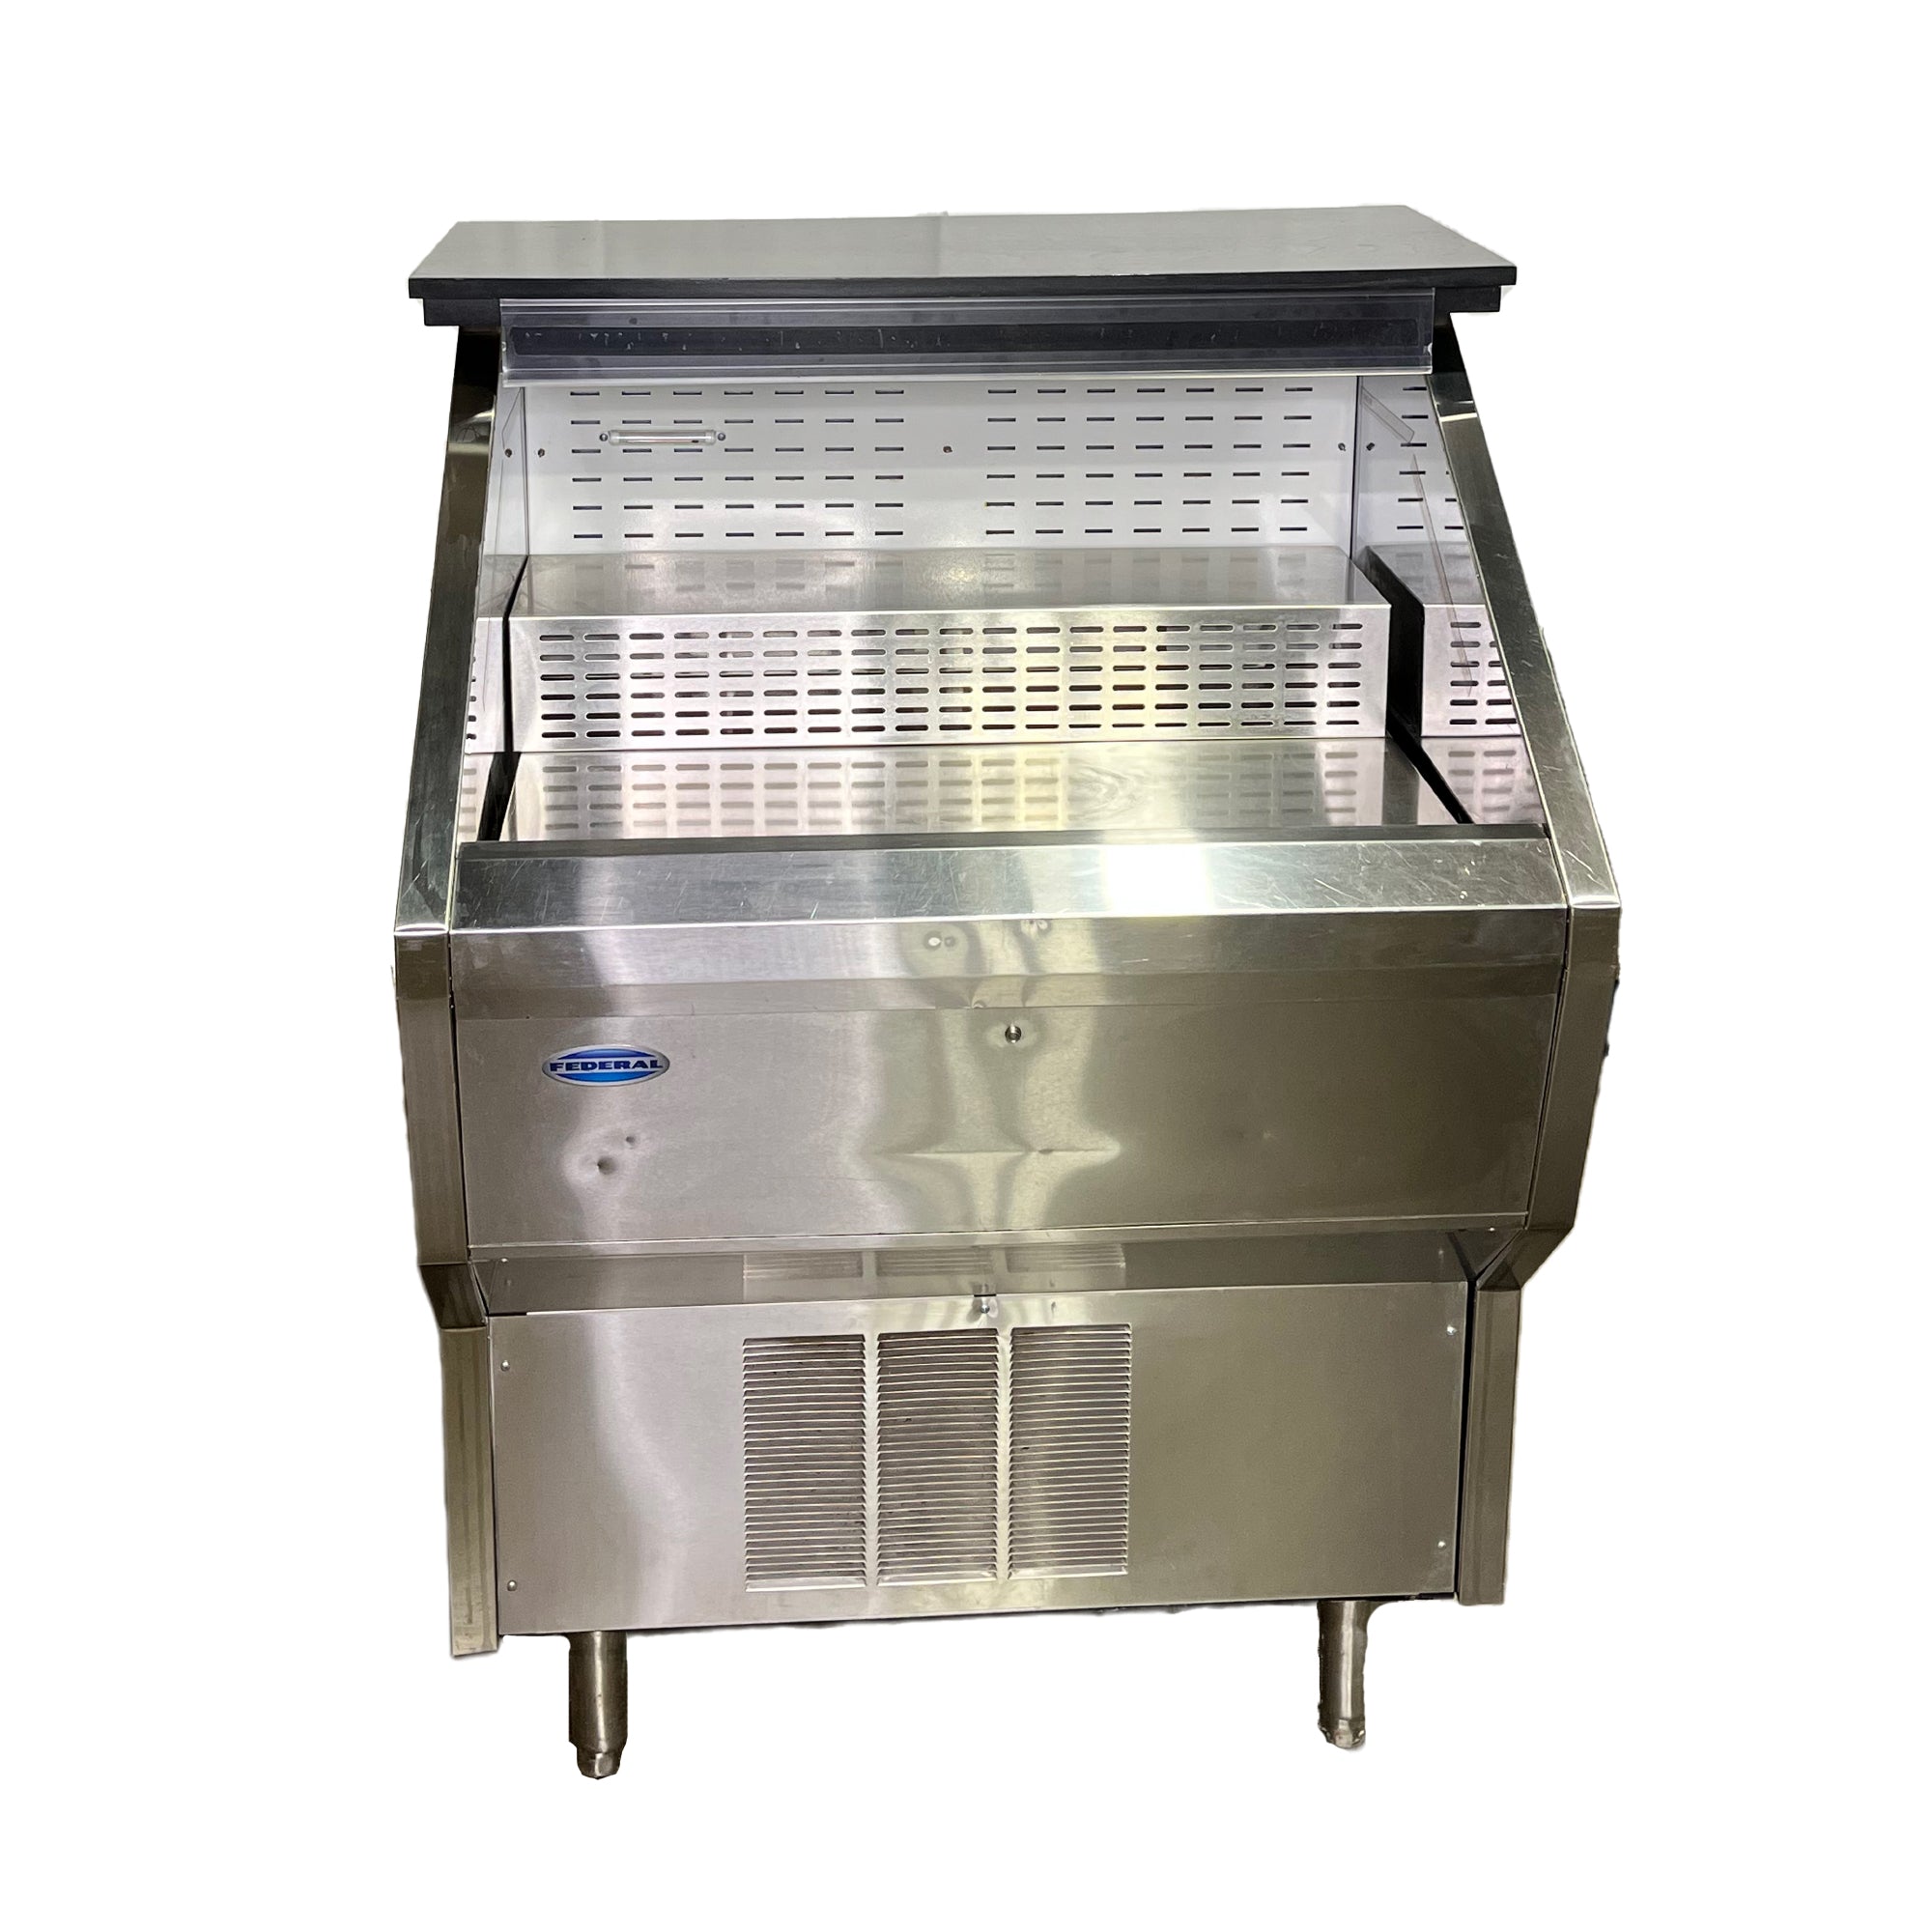 Weighing Out Fryer Basket Options - Pitco  The World's Most Reliable  Commercial Fryer Company